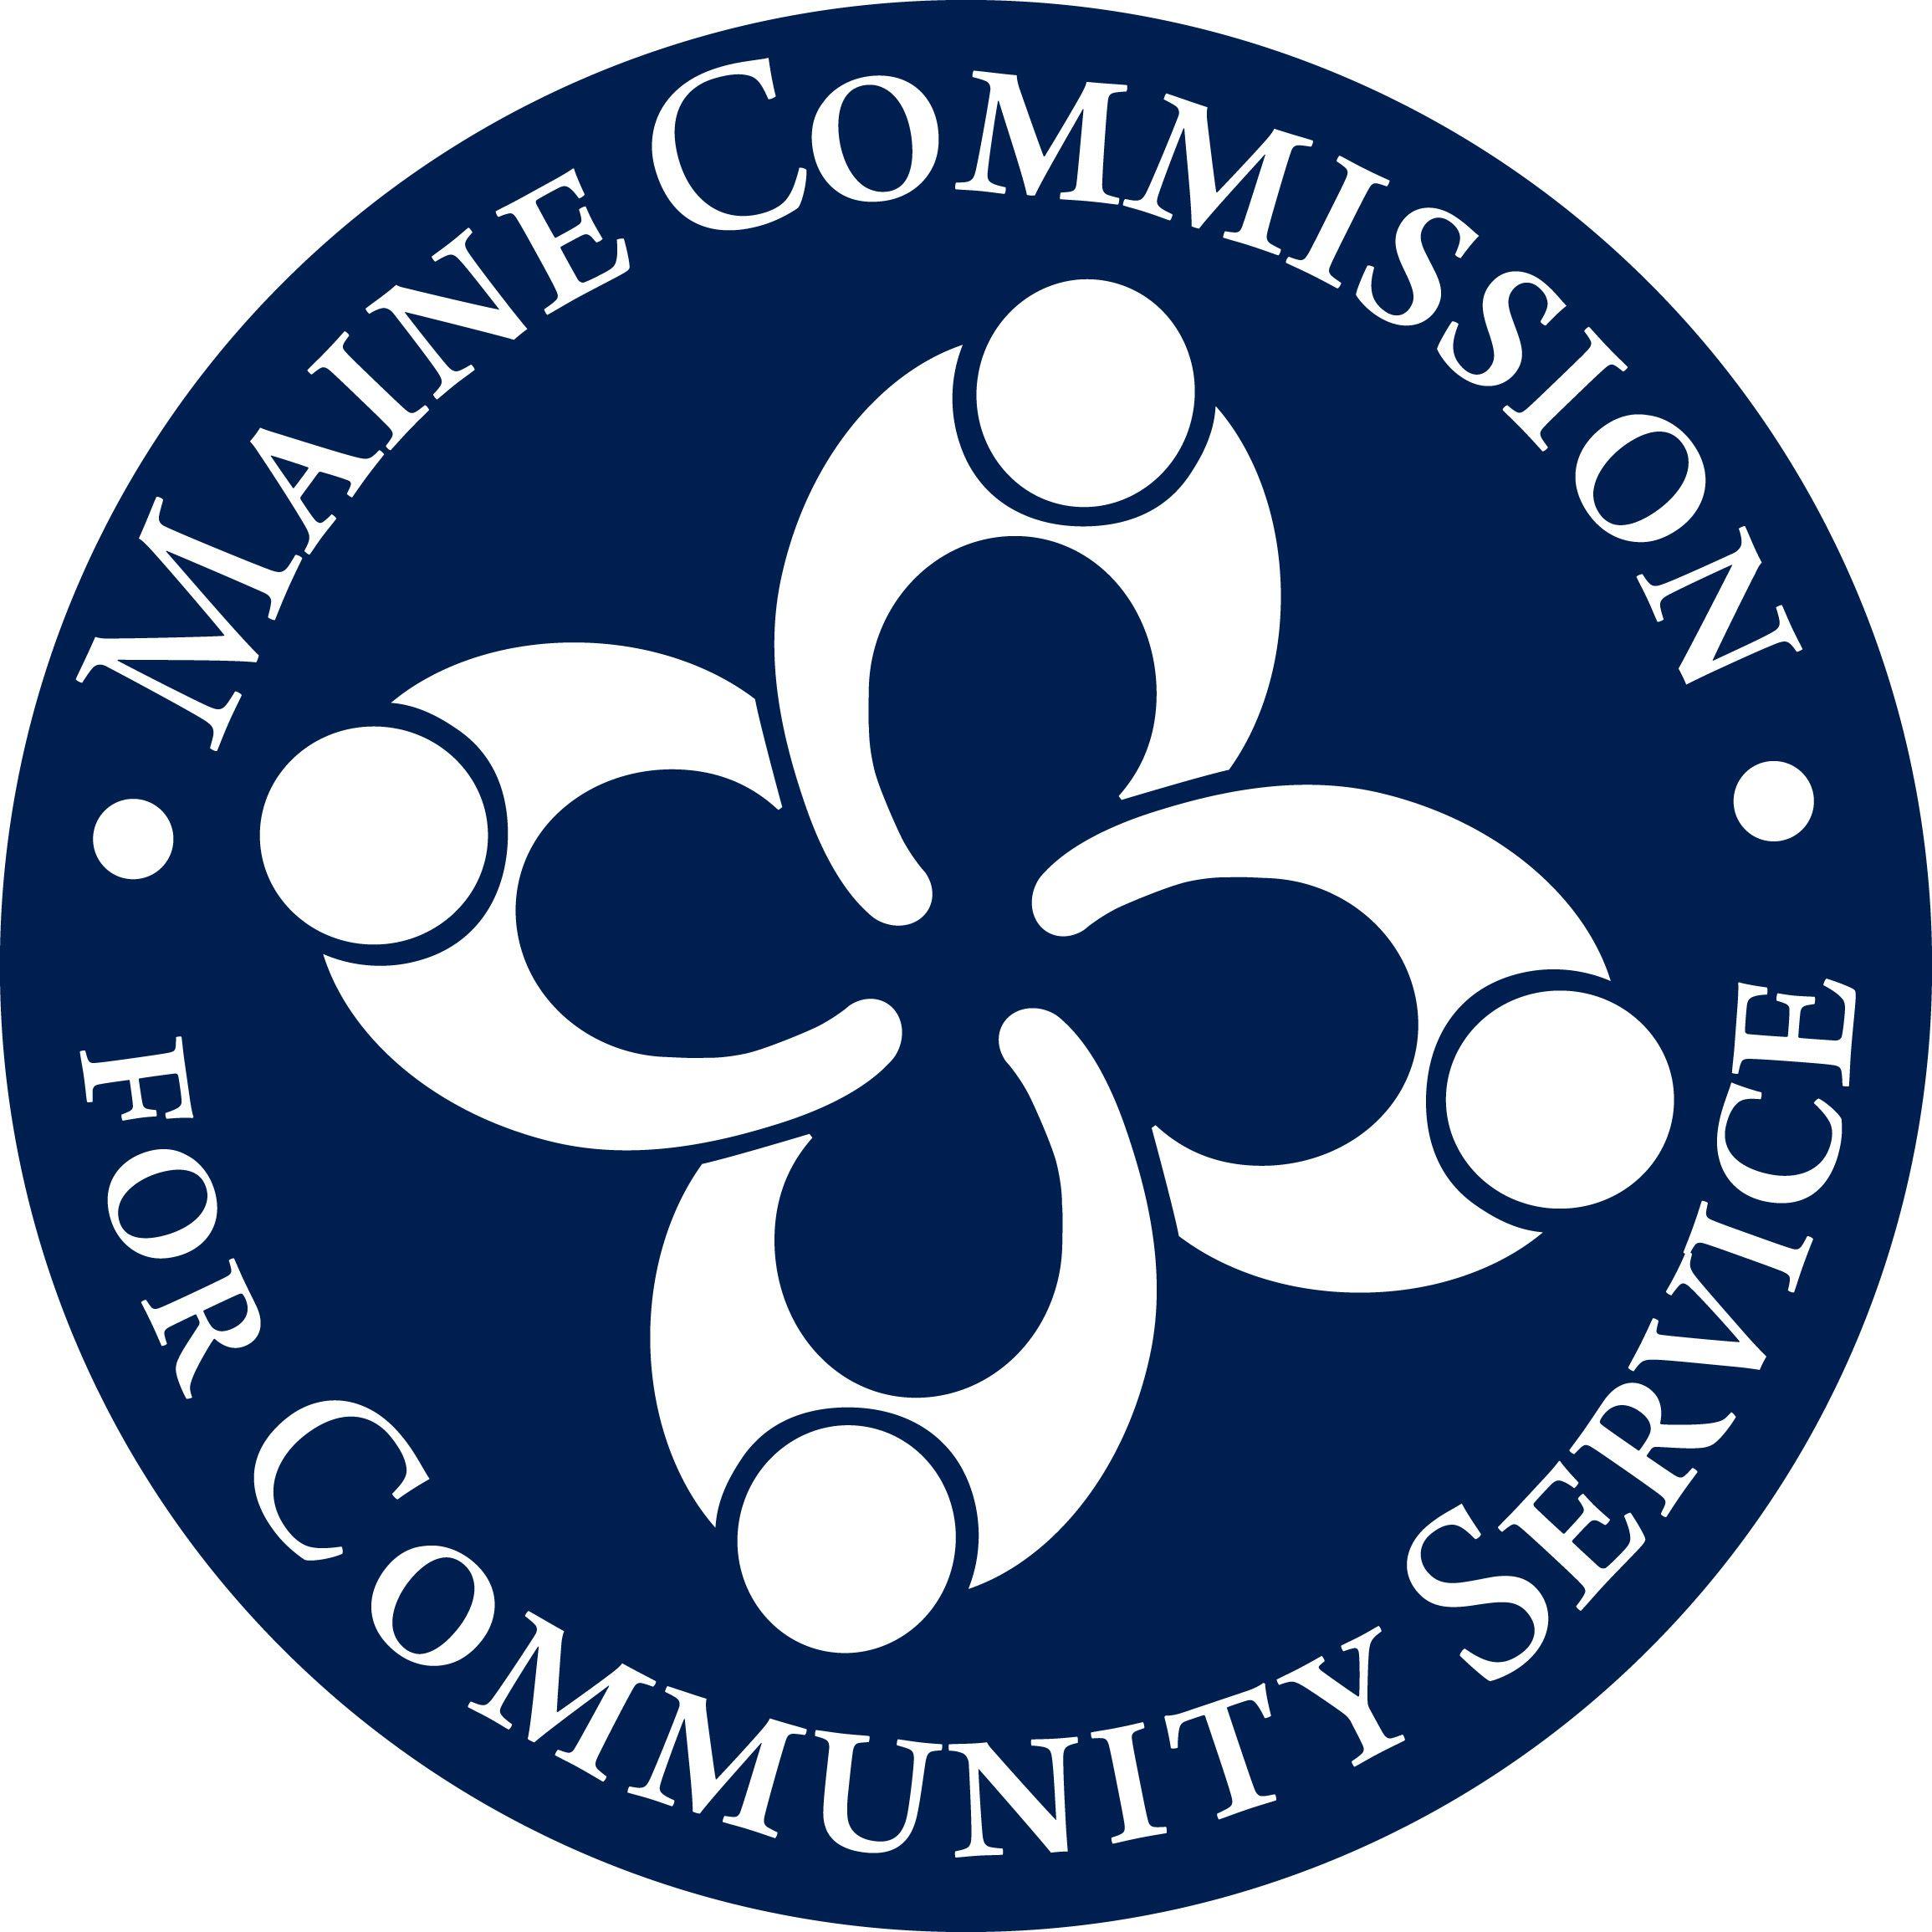 MaineDOT Logo - National Service in Maine - Maine Commission for Community Service ...